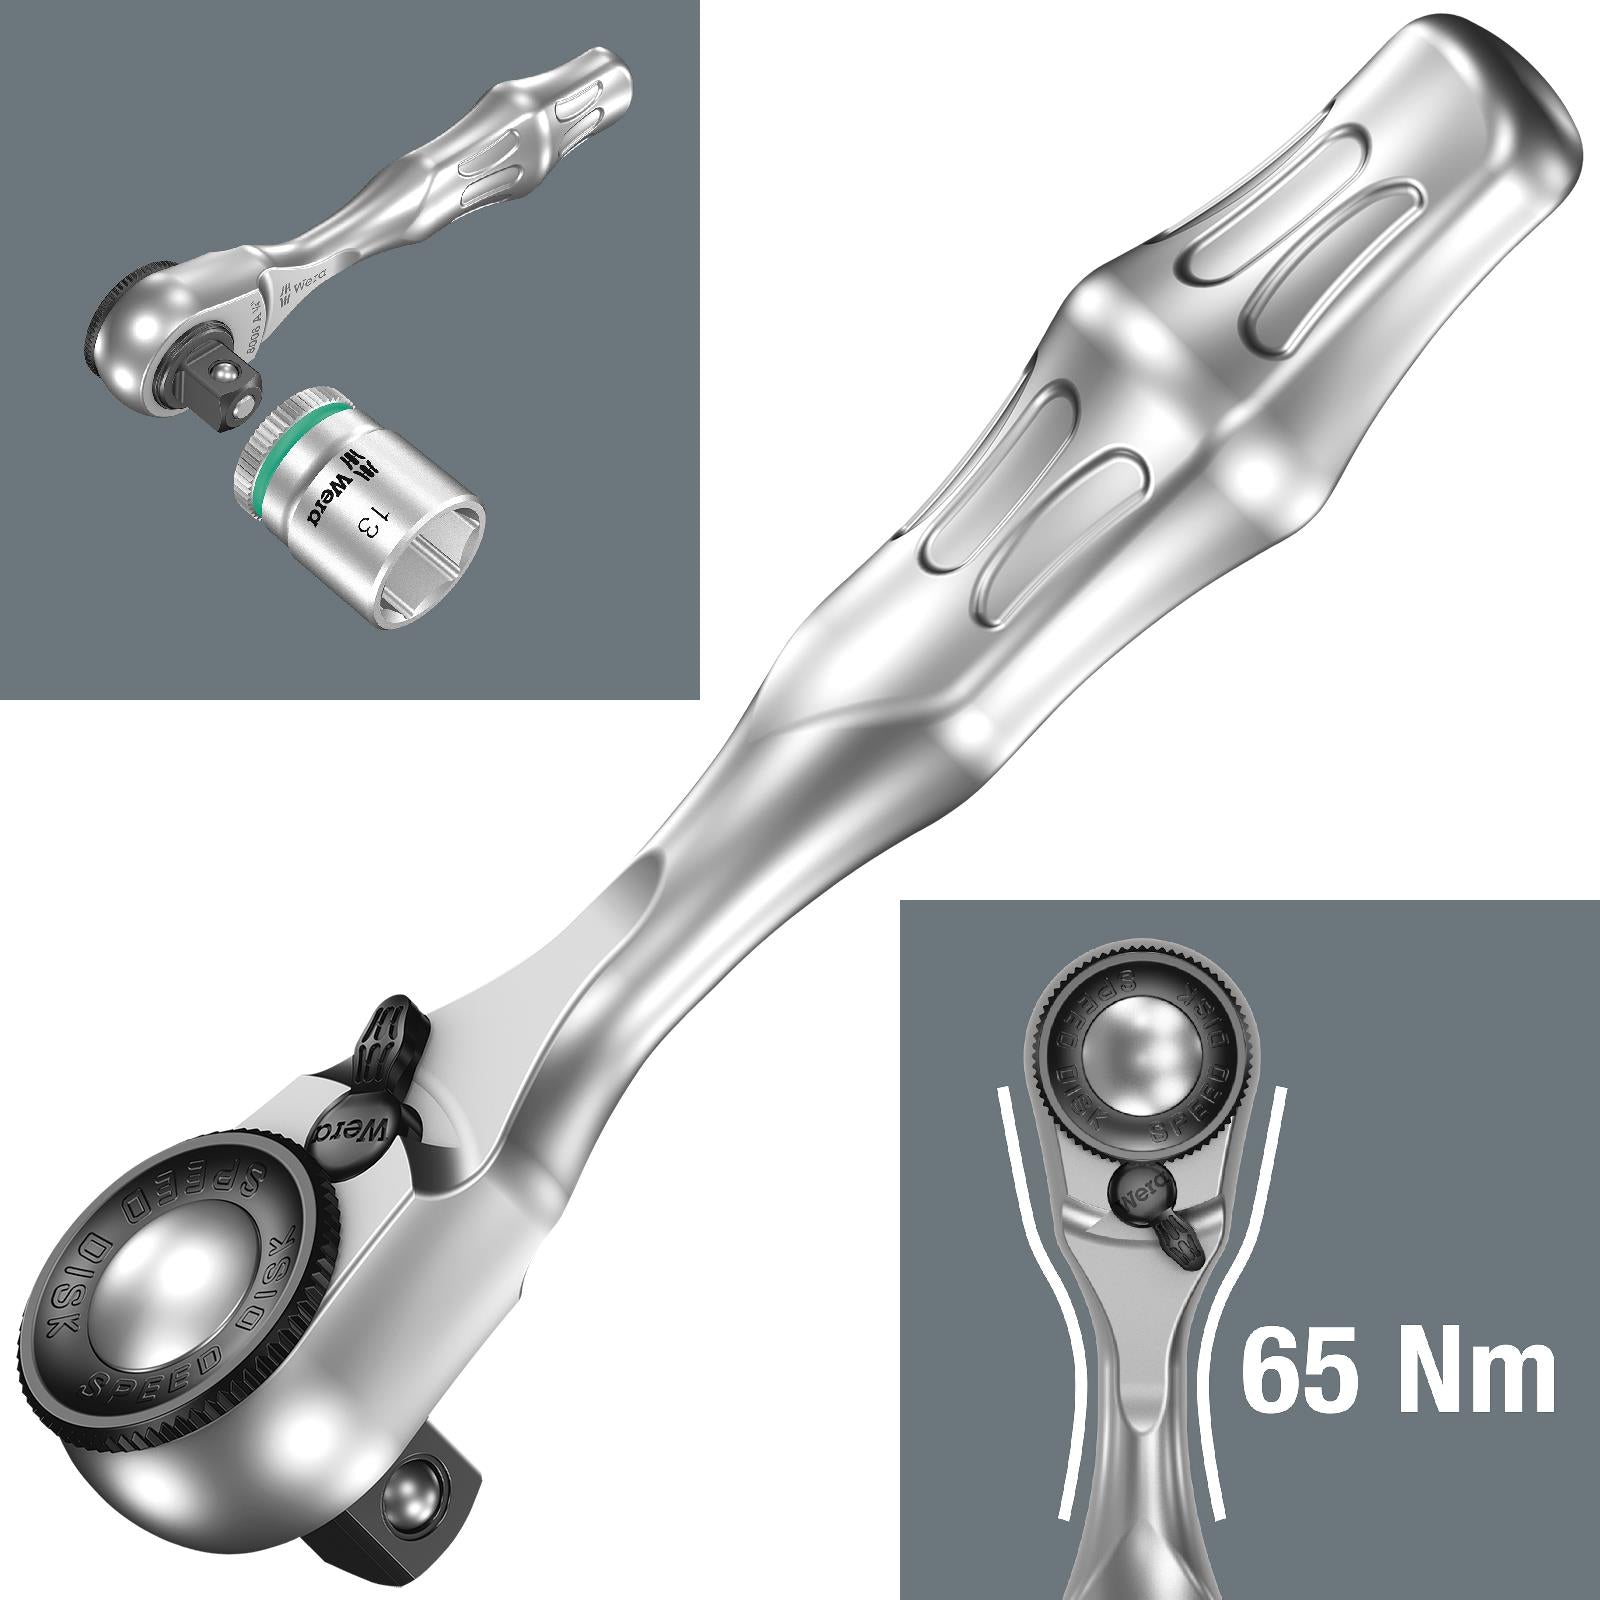 Wera 8008 A Zyklop Mini 3 Socket Ratchet Wrench Handle 1/4" Drive Fine Tooth